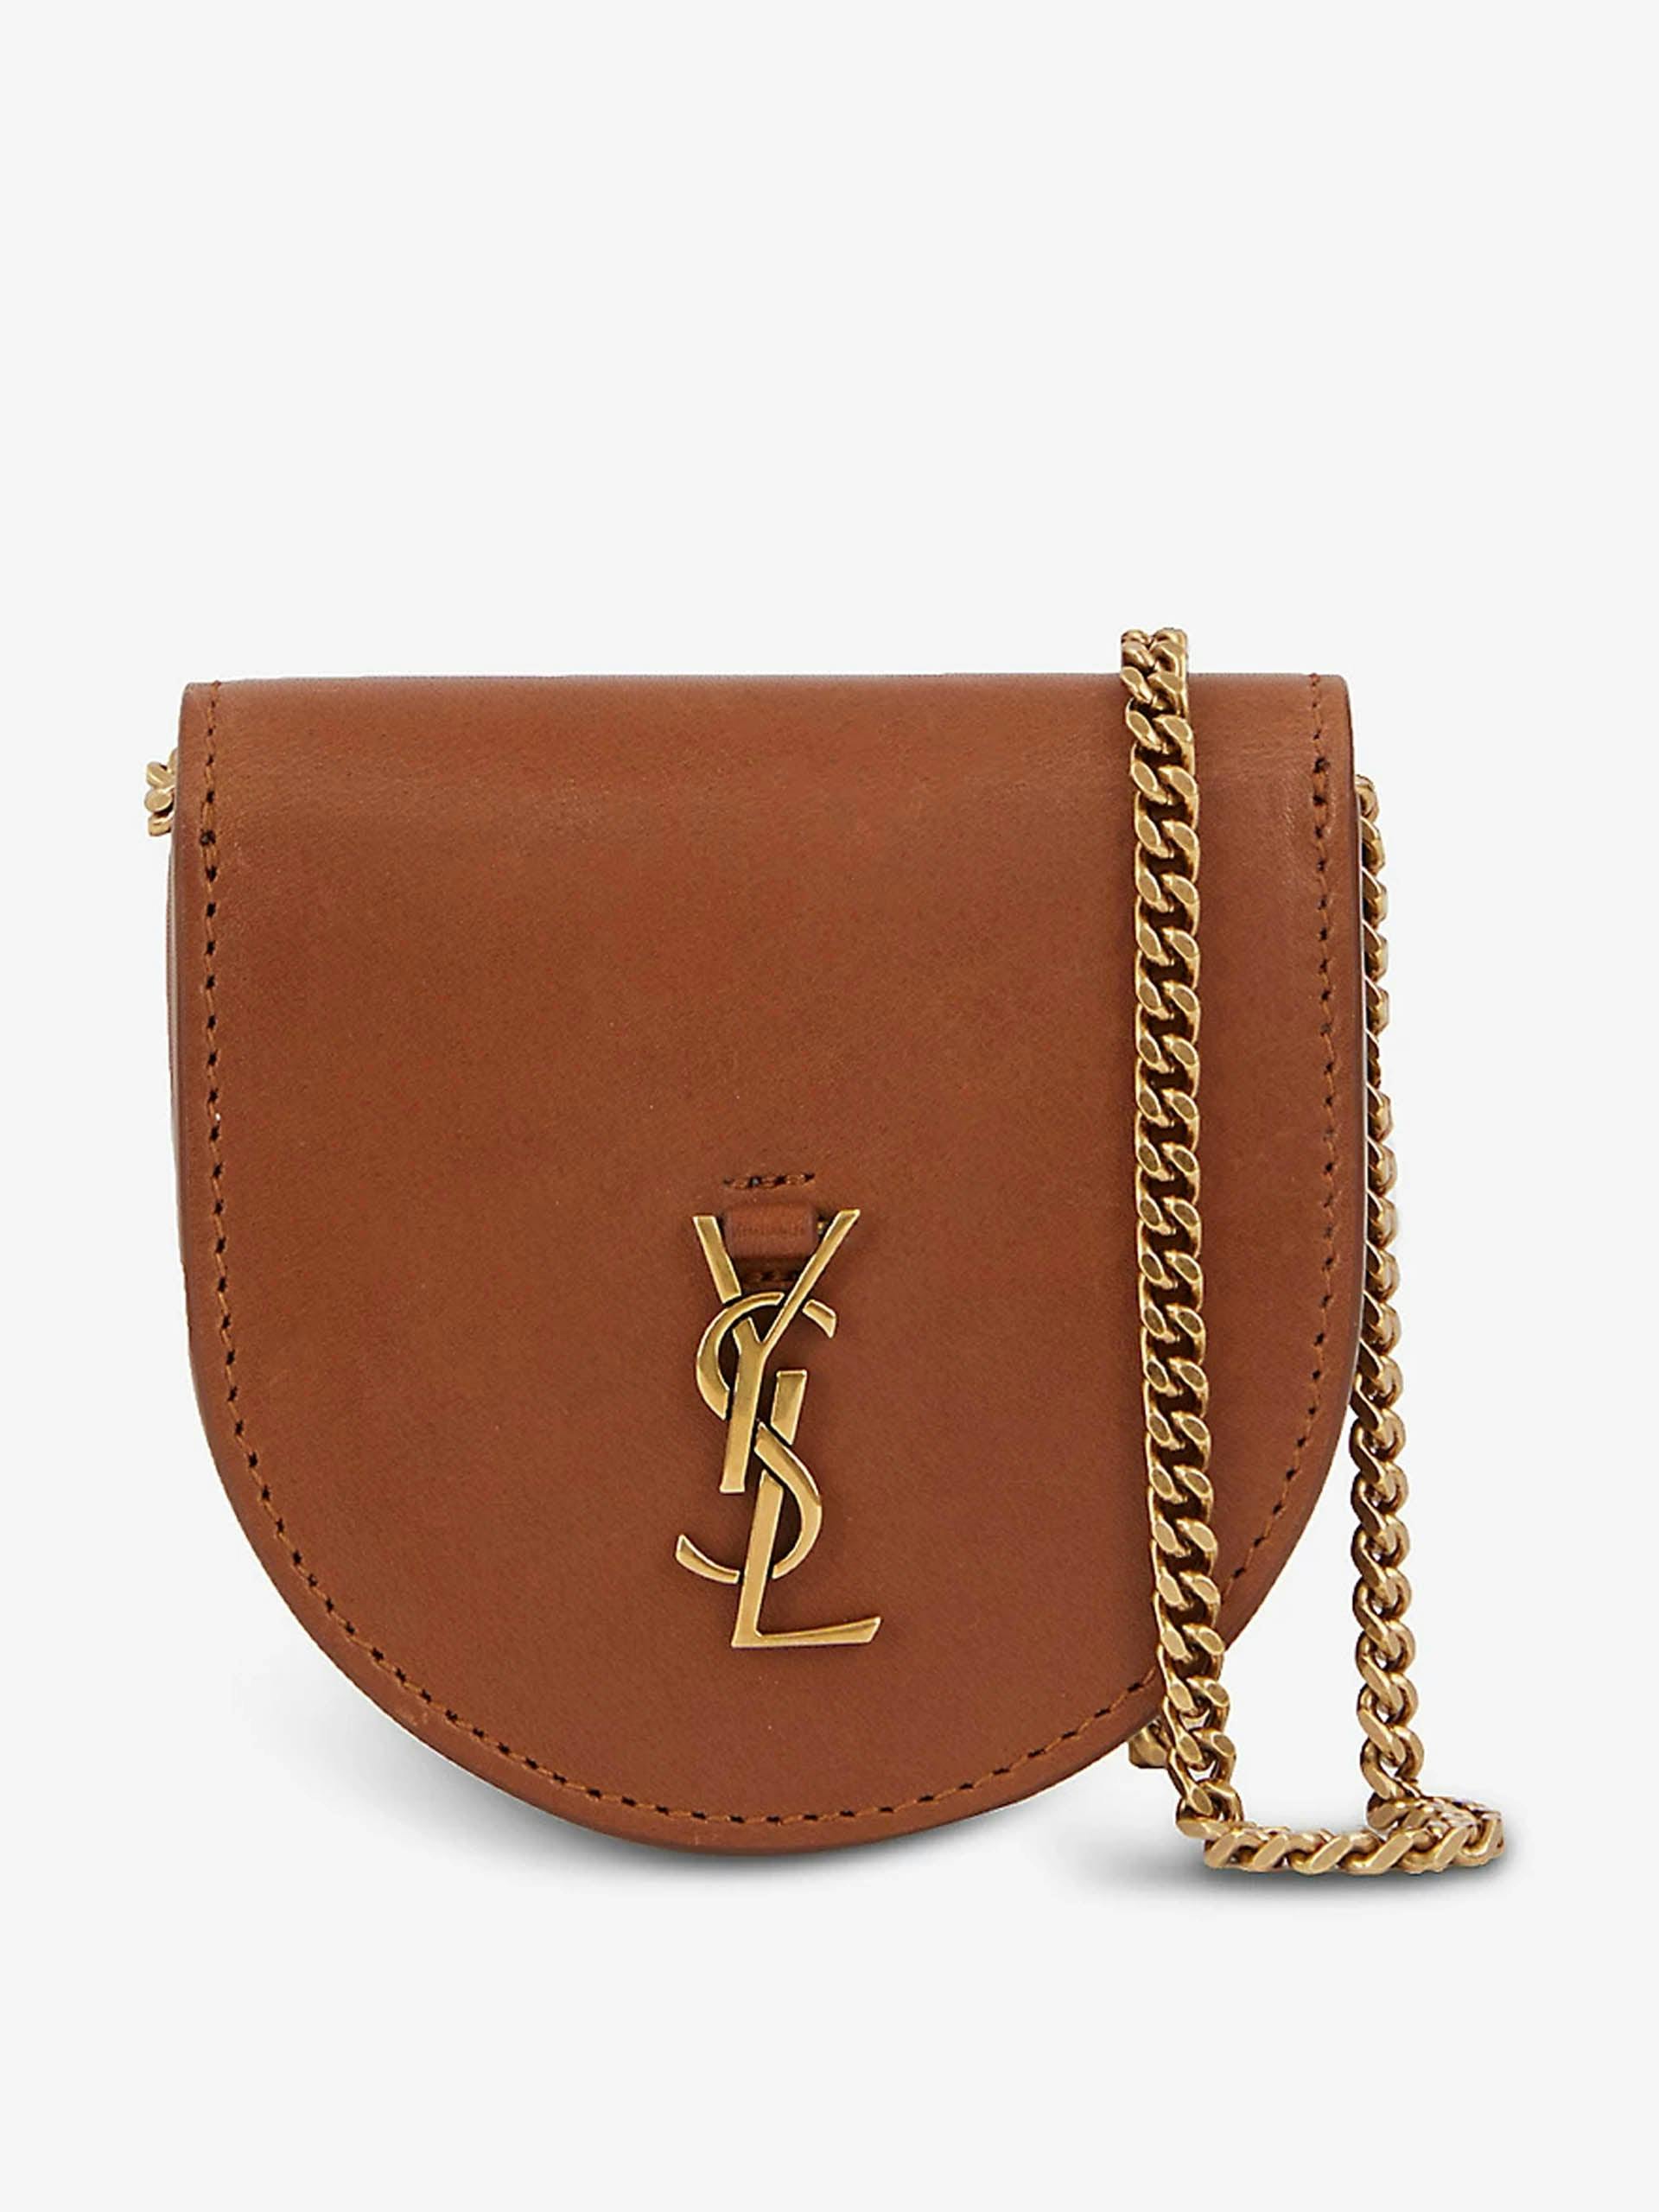 Kaia Baby leather cross-body purse bag in Brick